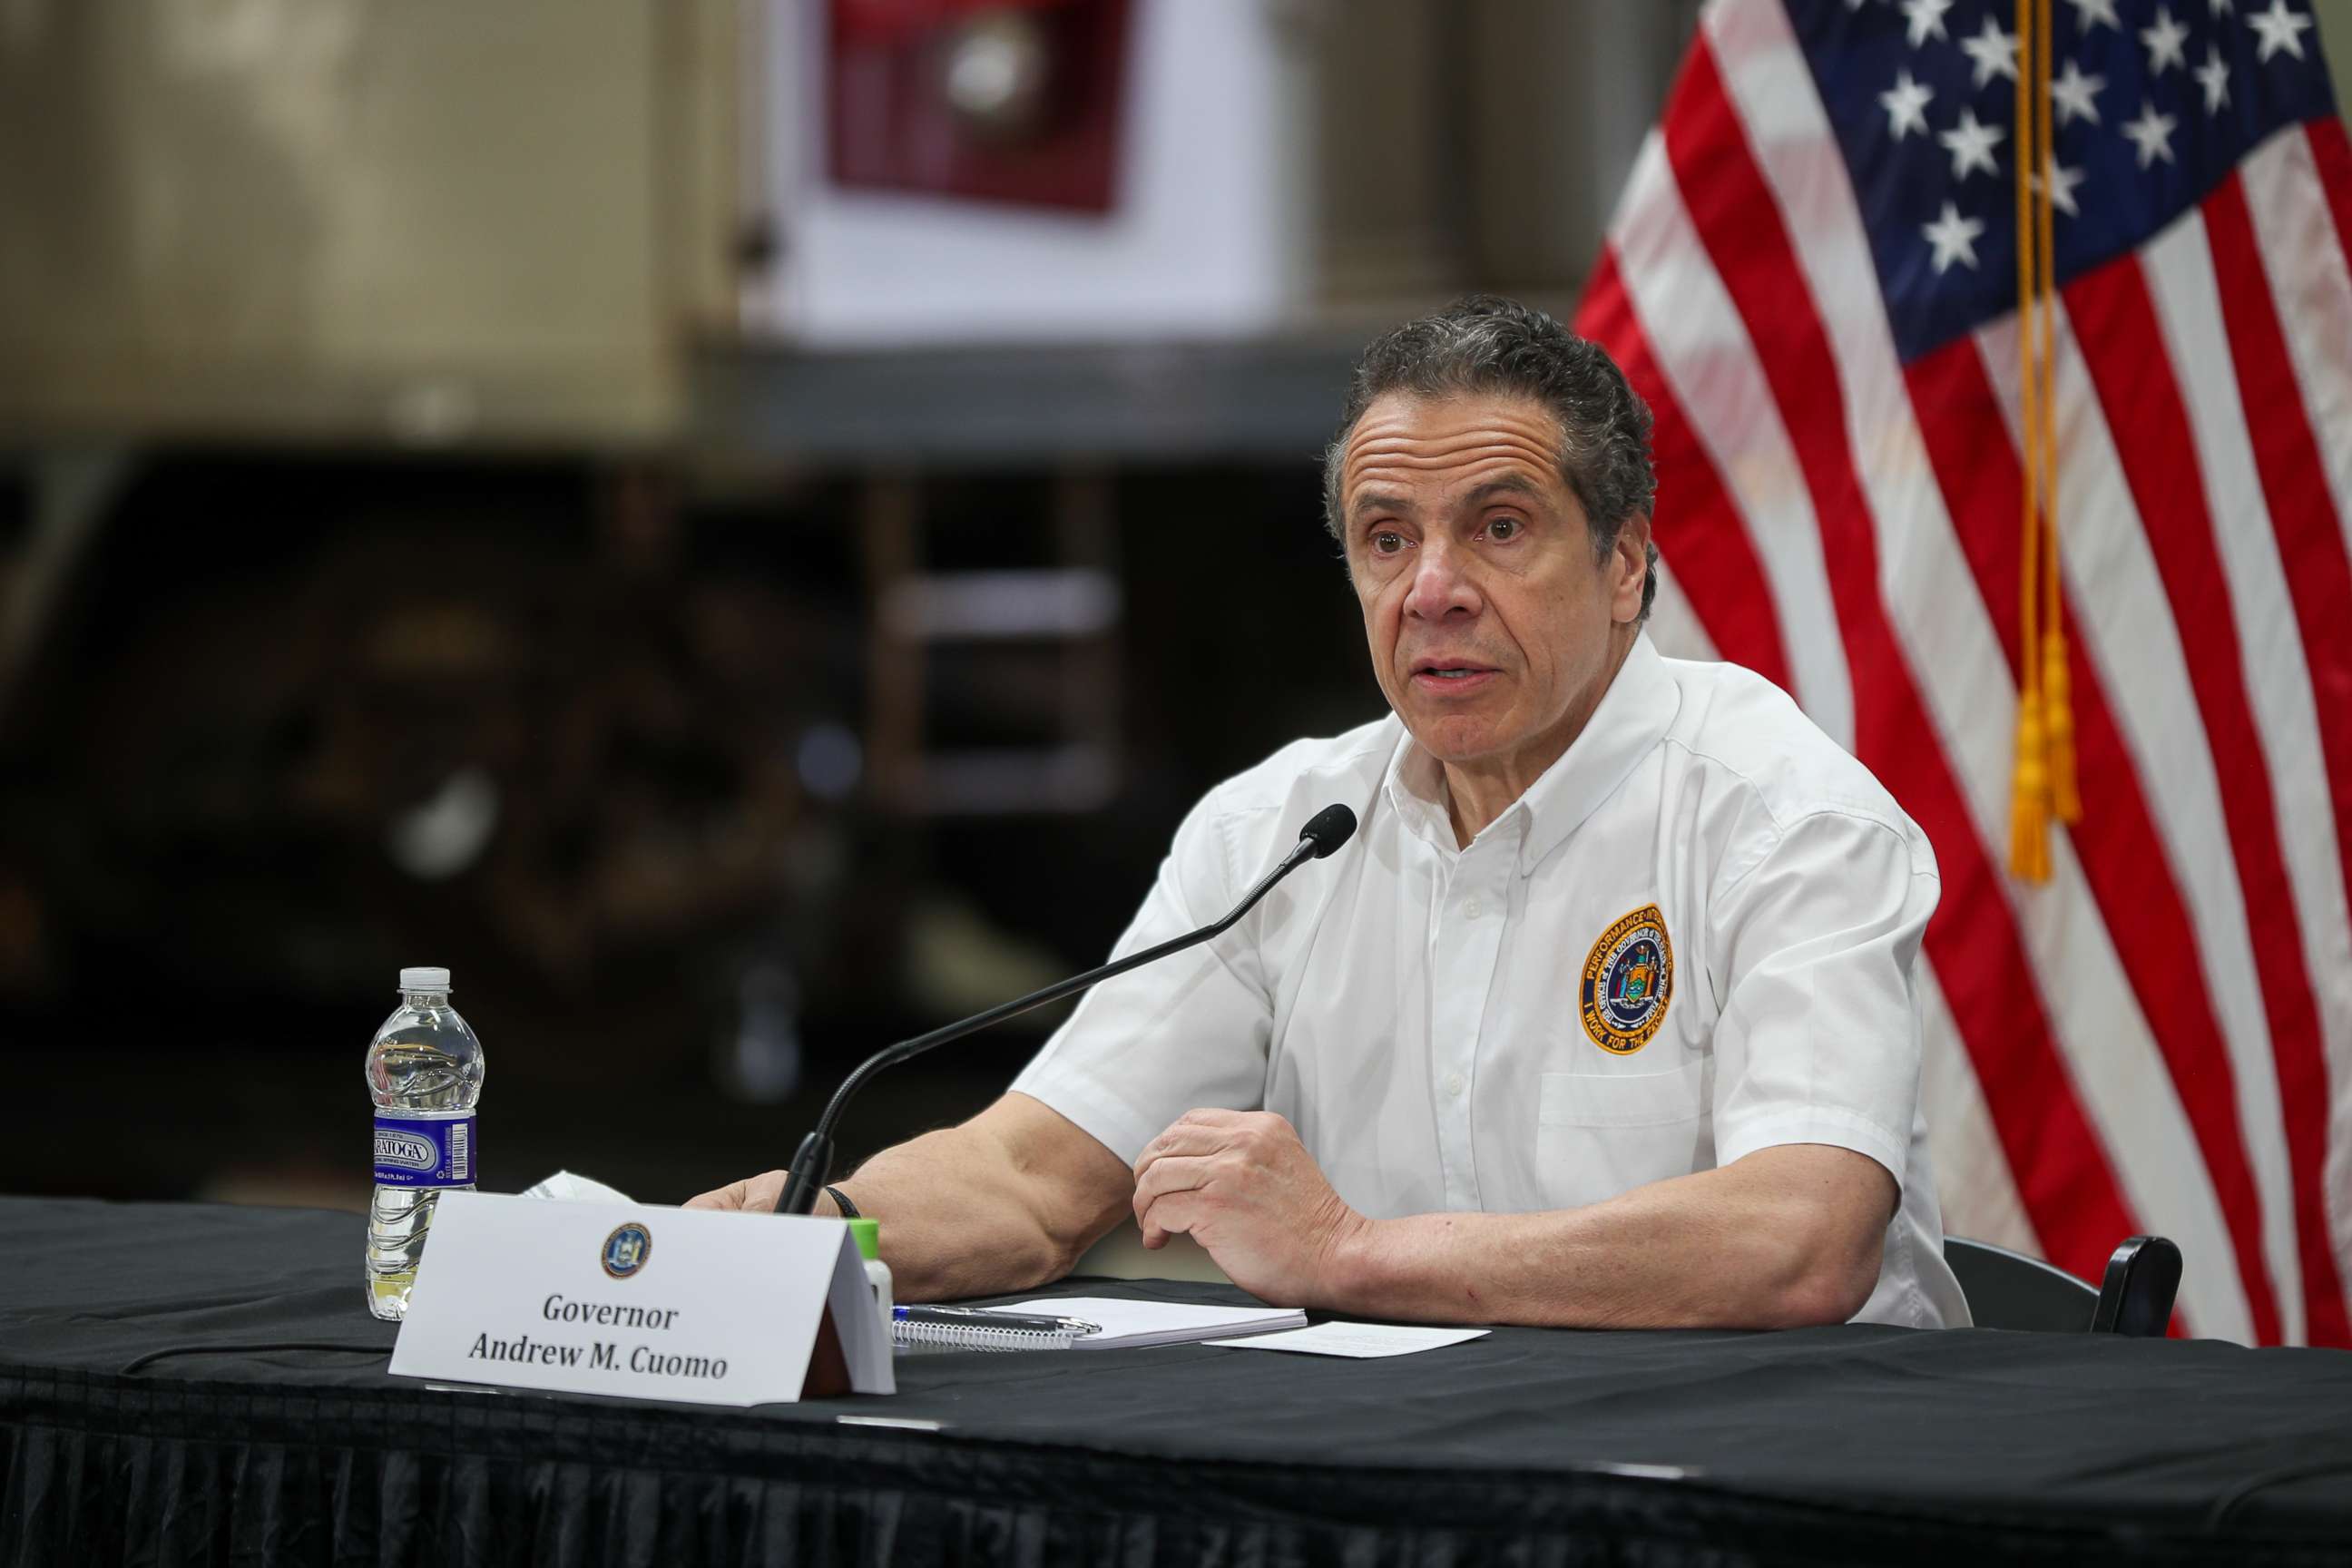 PHOTO: New York Governor Andrew M. Cuomo visits the maintenance facility of the Metropolitan Transportation Authority (MTA) and speaks about Covid-19 pandemic in Queens, New York City, United States on May 2, 2020.